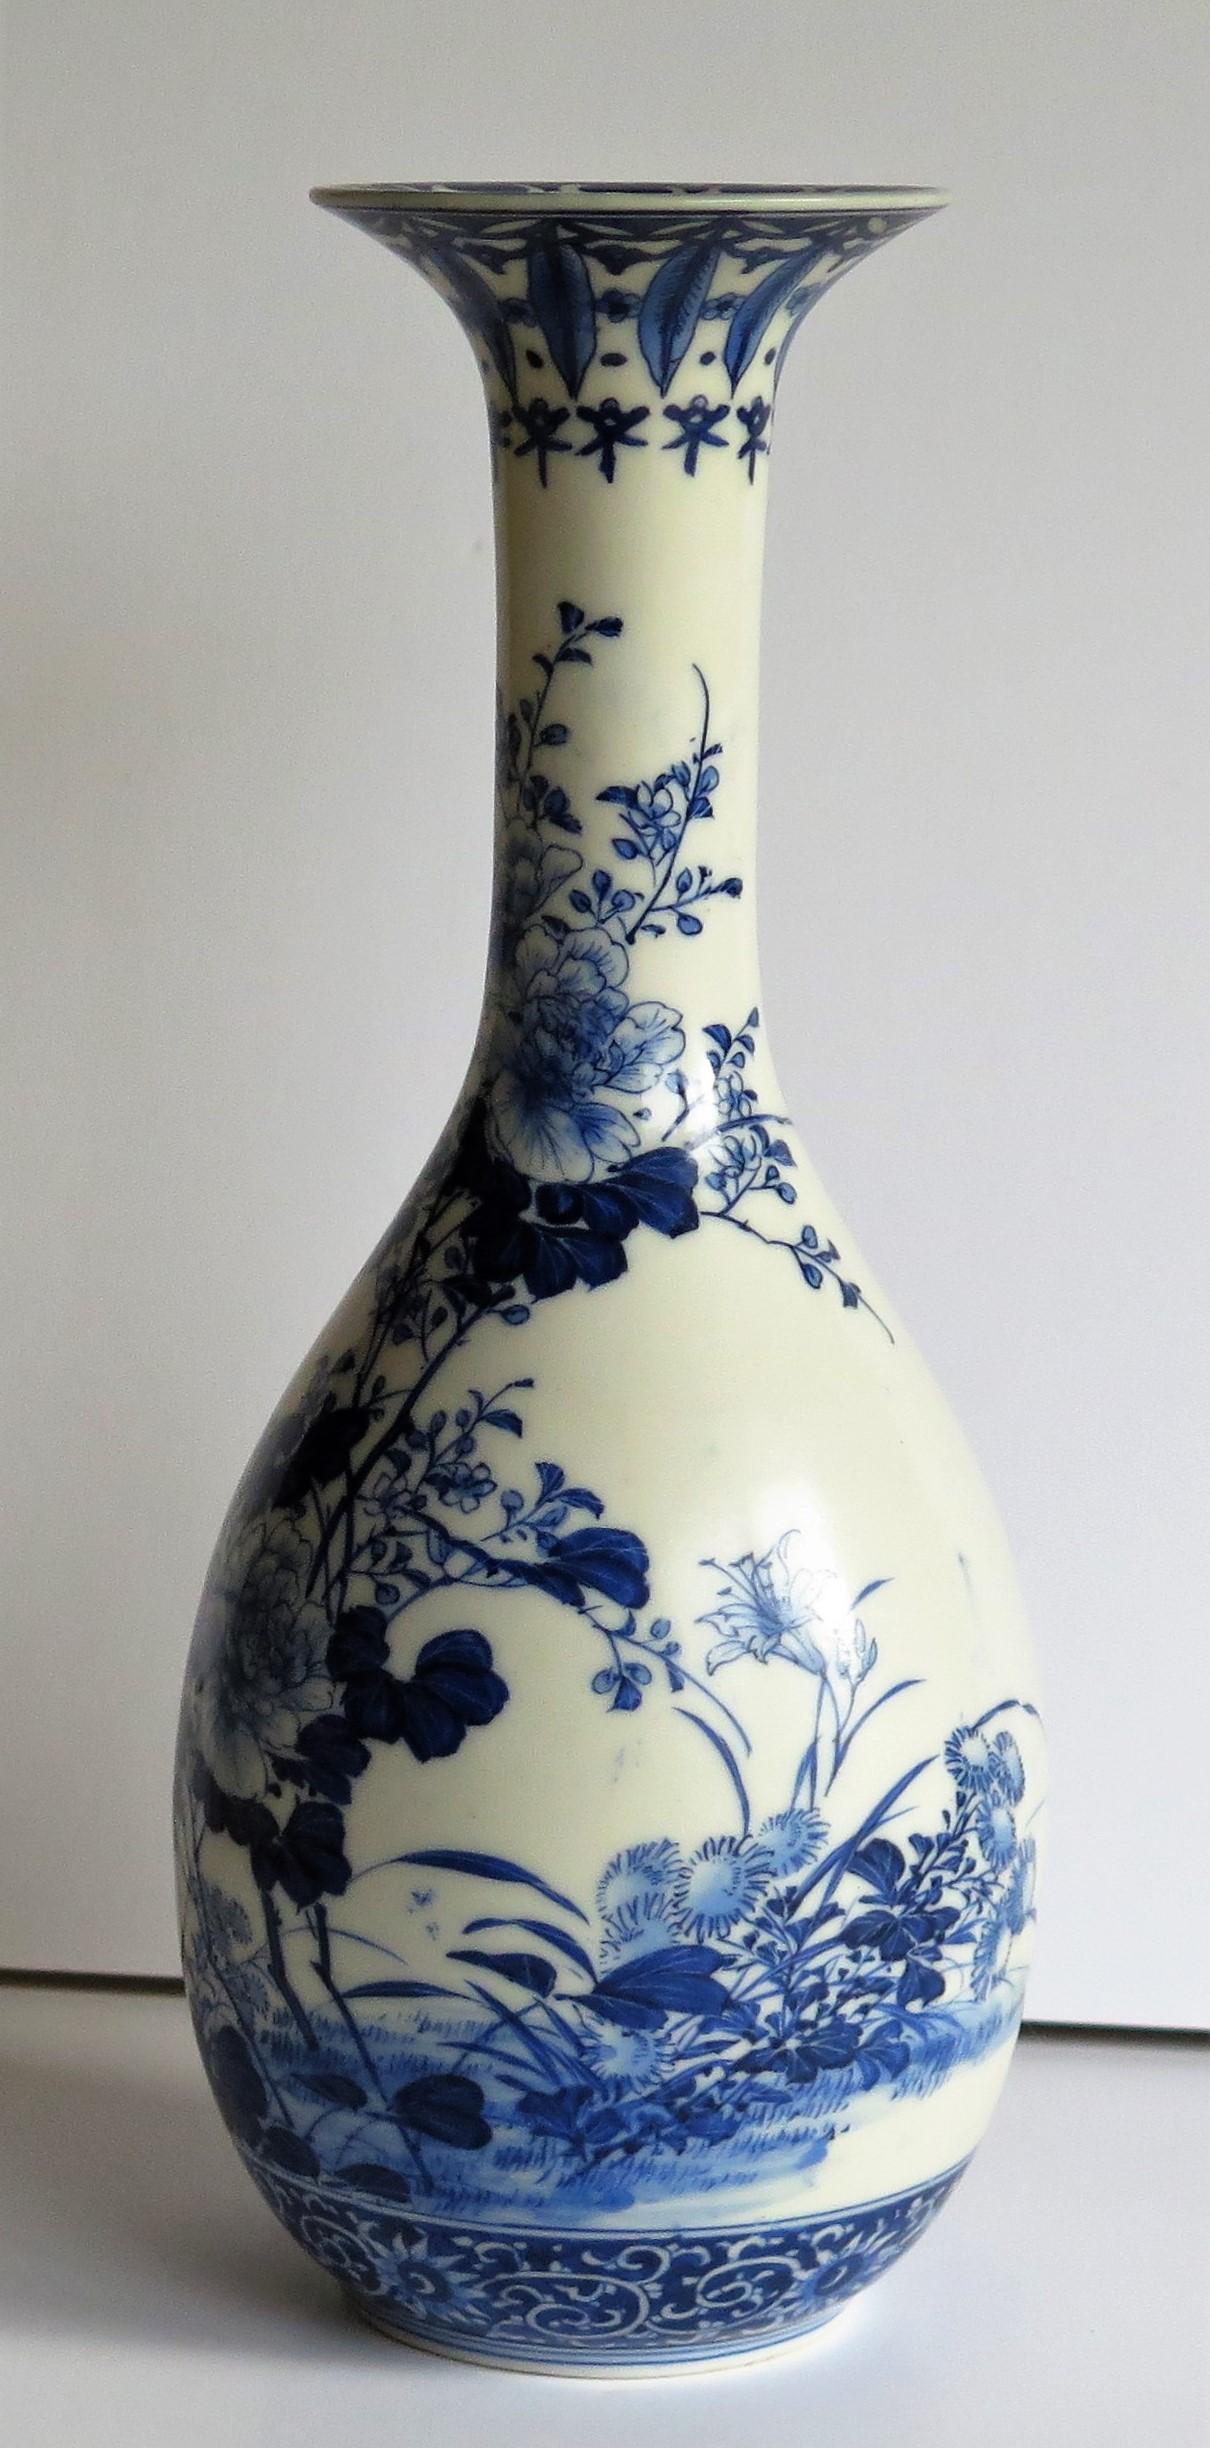 19th Century 19th C Qing Chinese Porcelain Bottle Vase Blue and White Finely Hand Painted